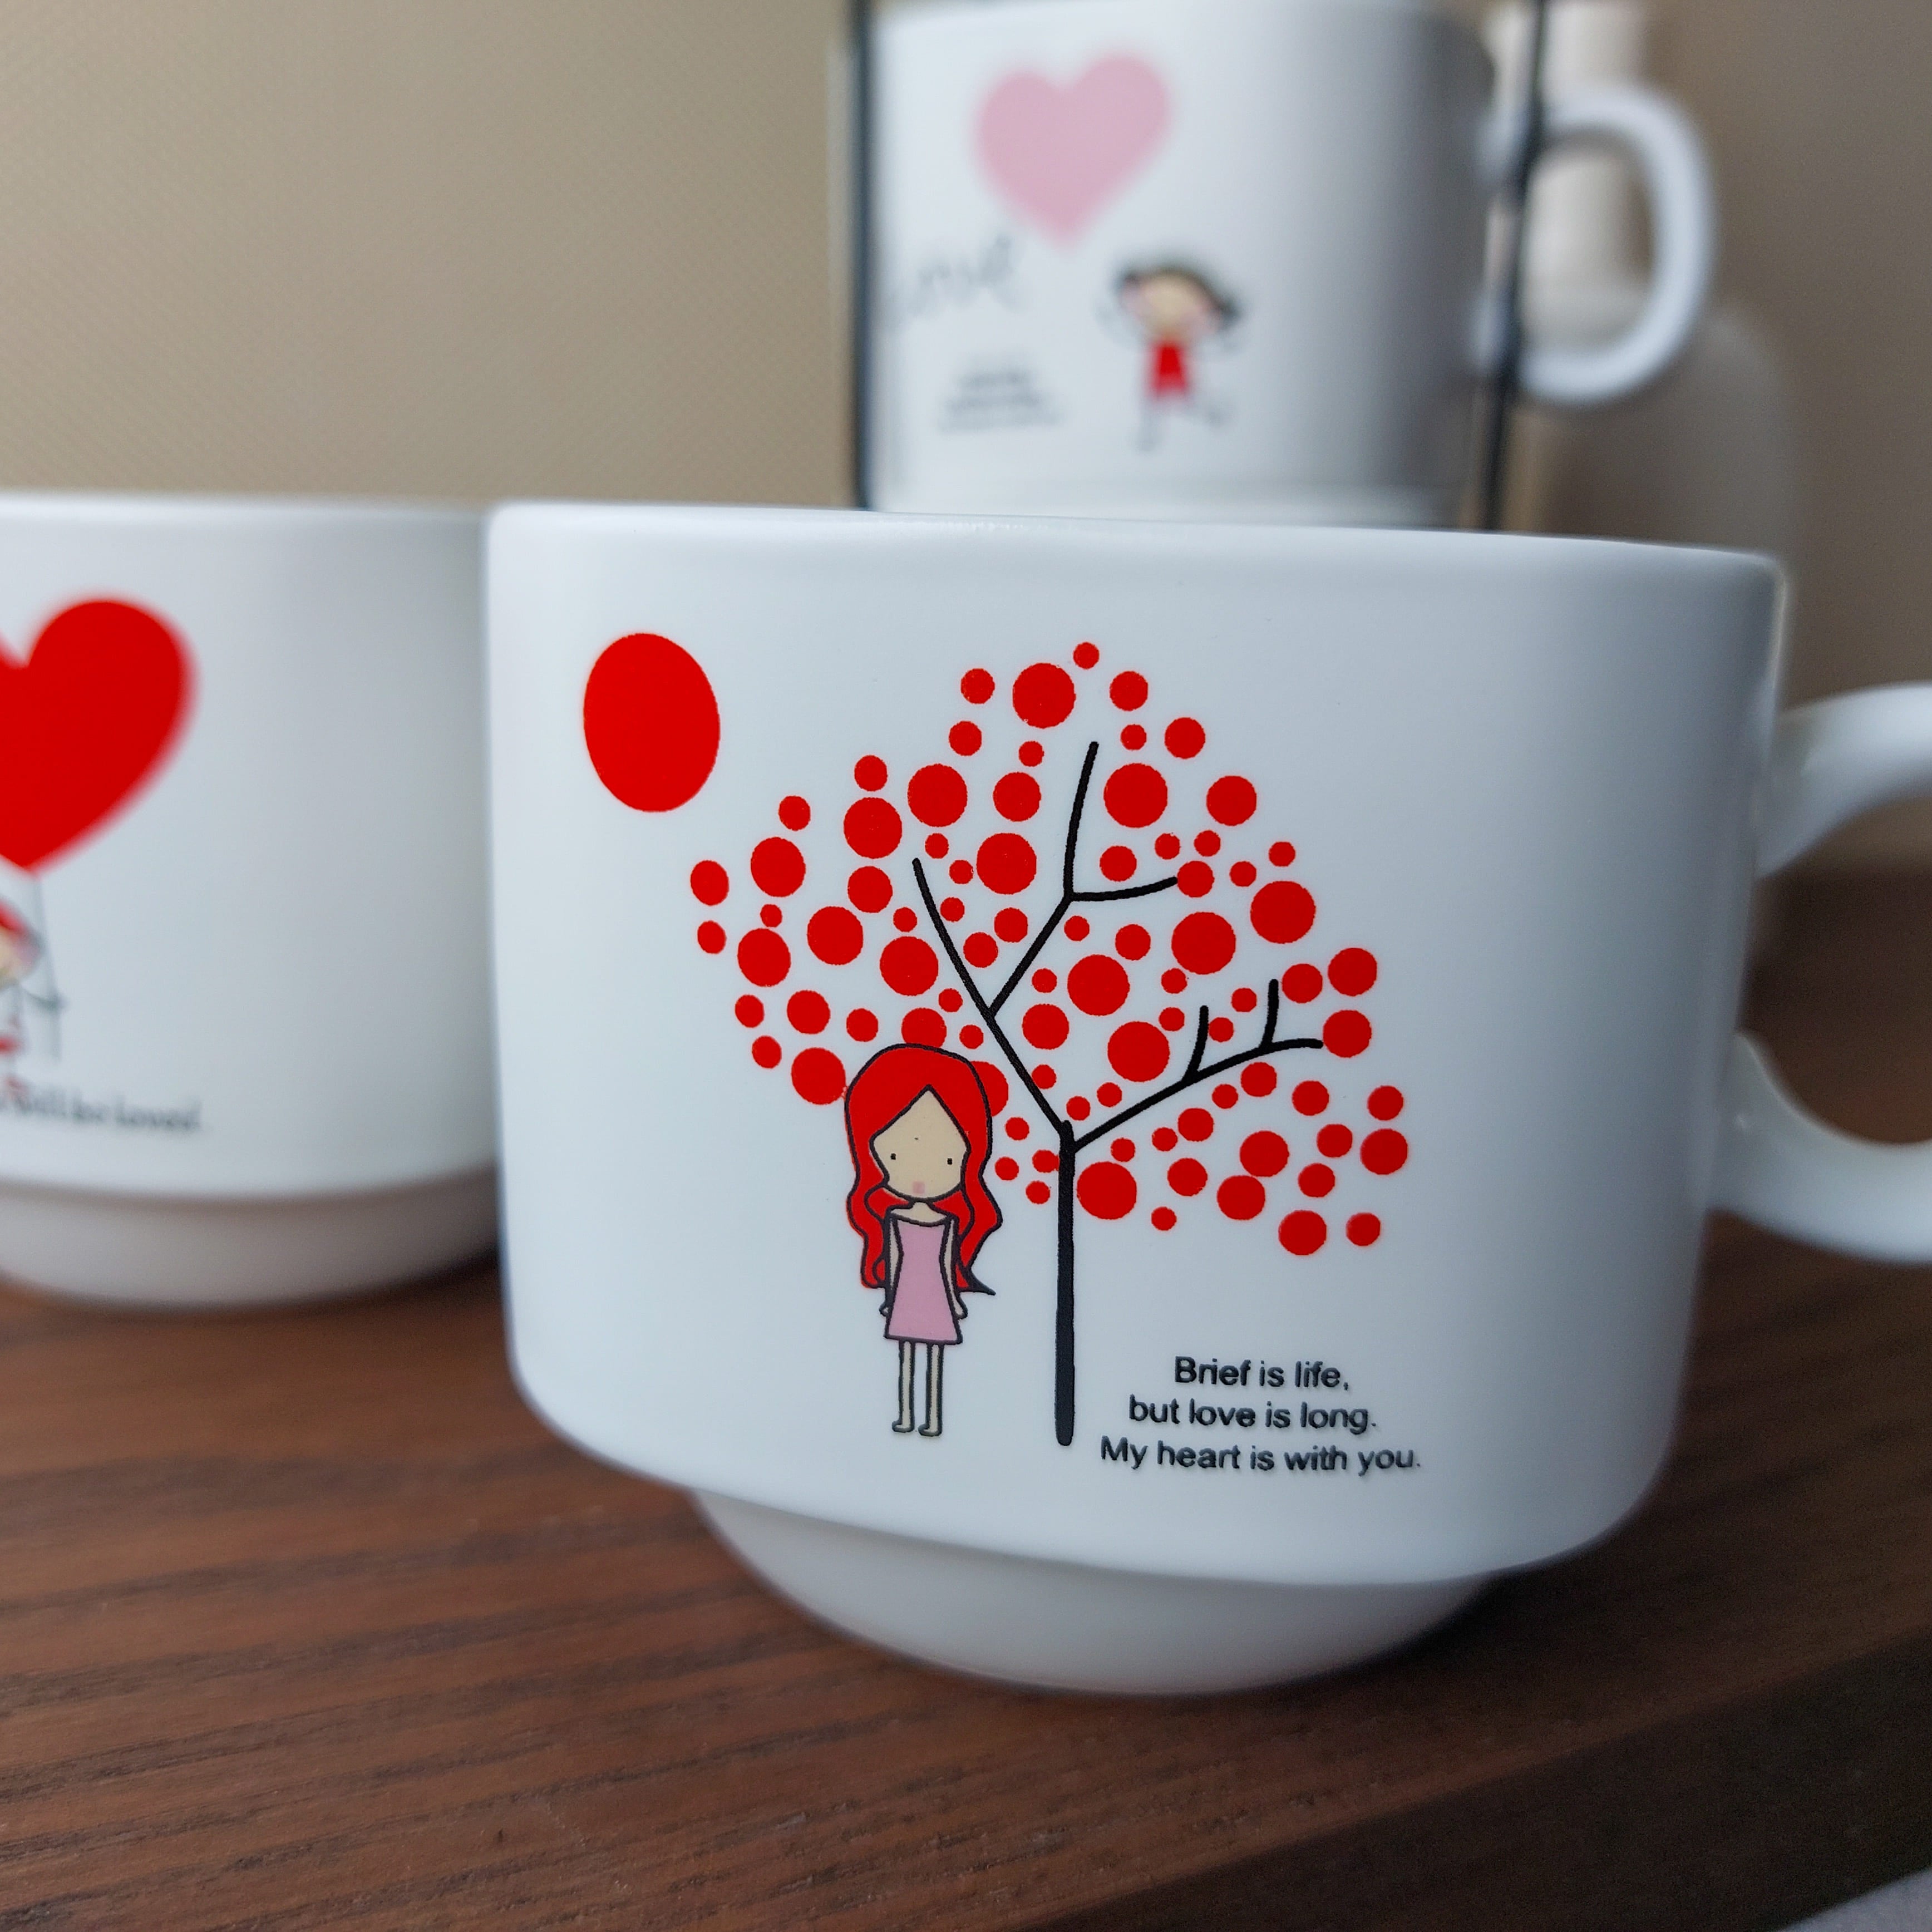 Love Messages Ceramic Mugs With Tower Stand (4 pcs set)